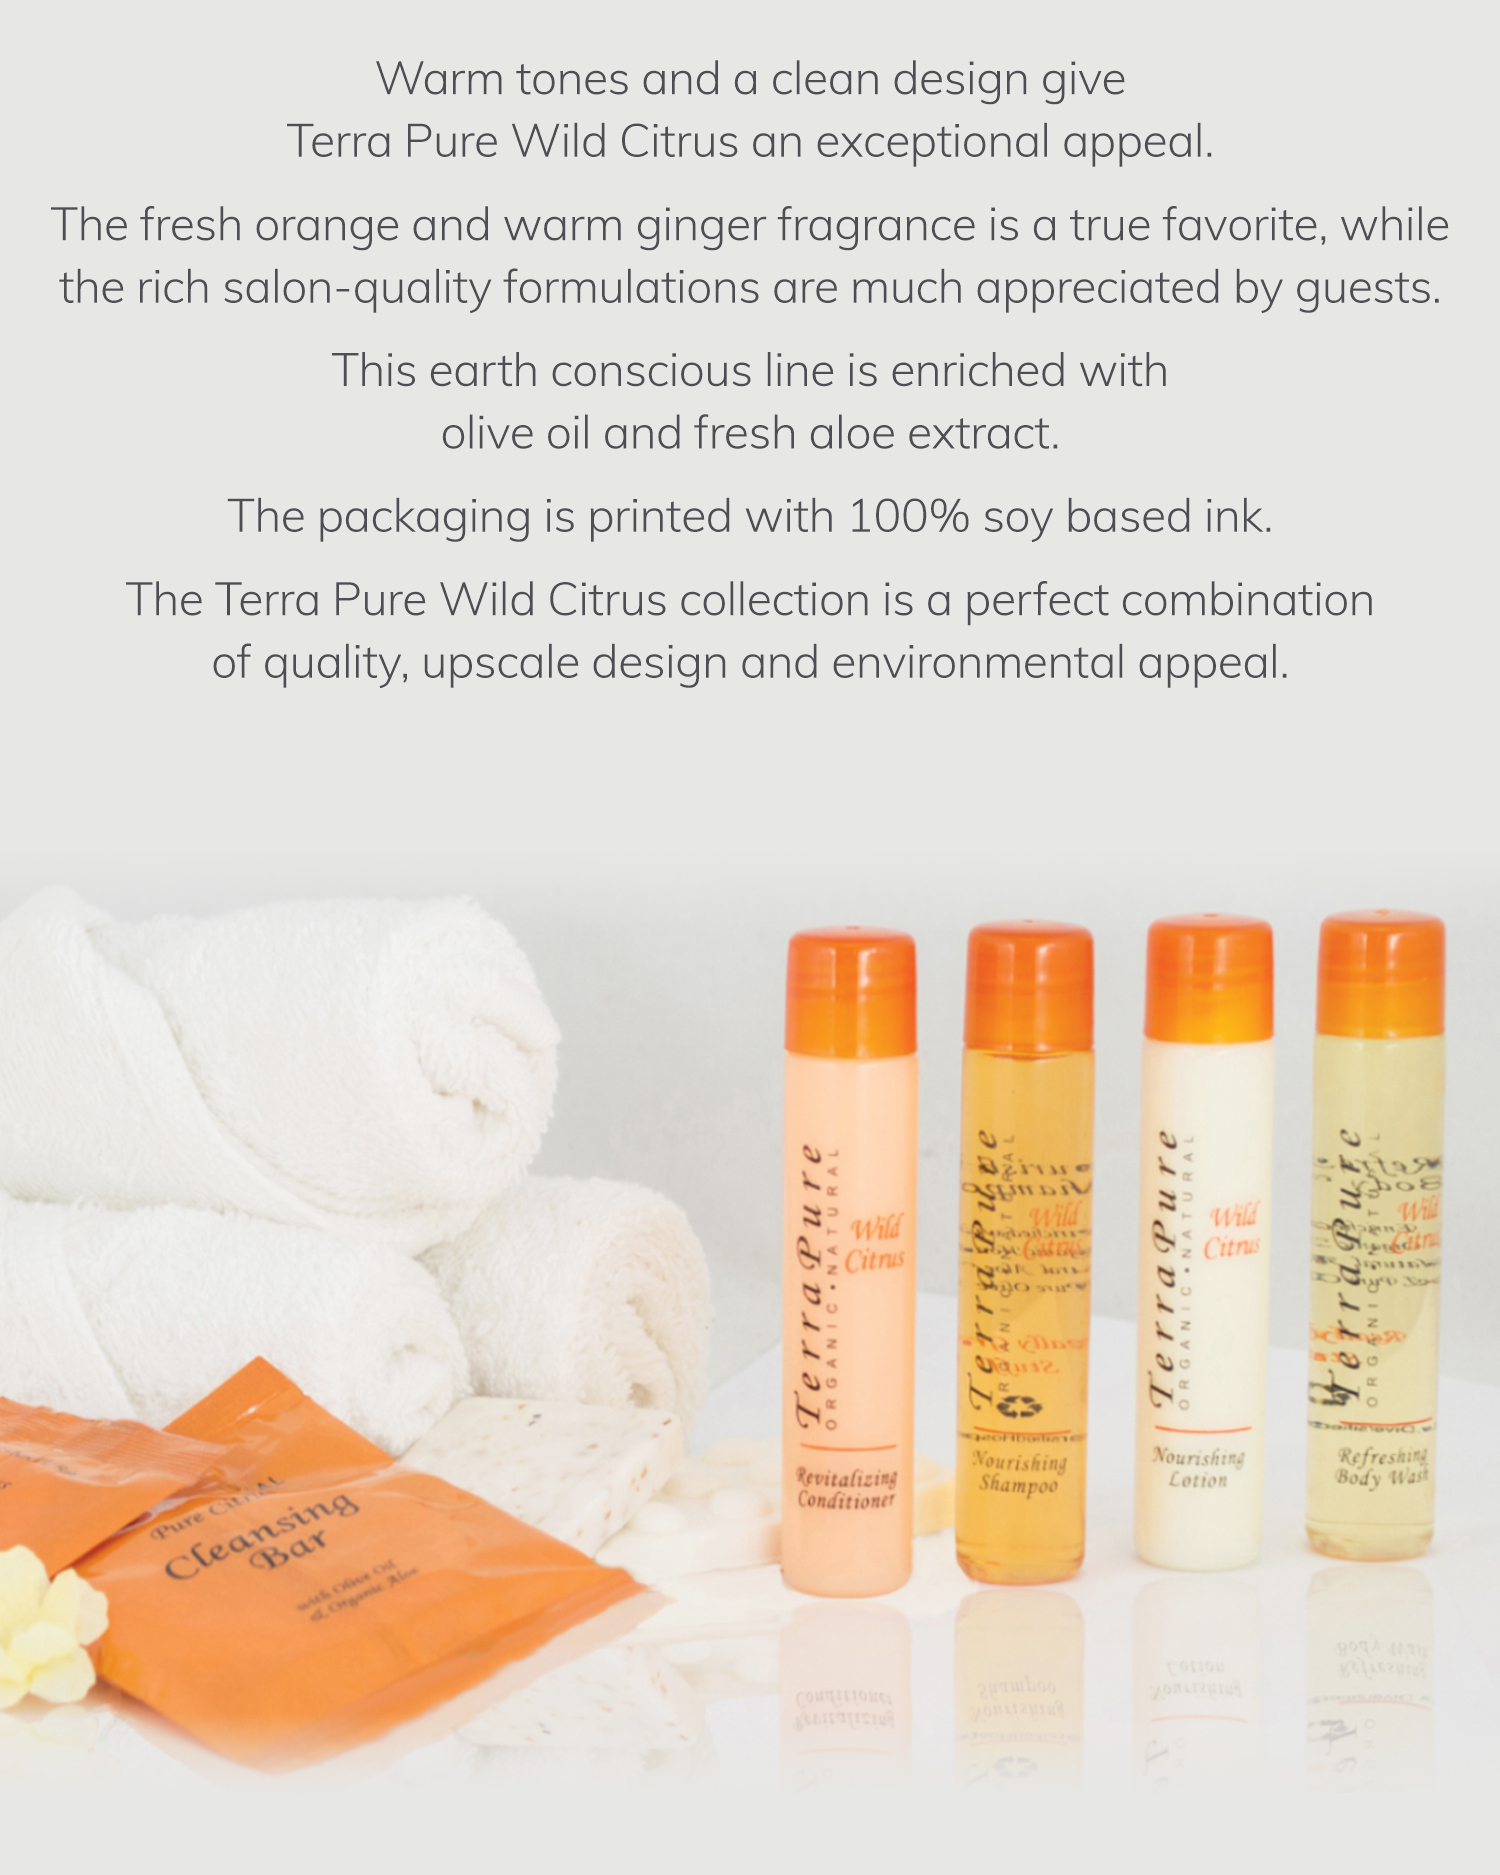 Environmentally friendly Terra Pure Wild Citrus orange and ginger scented hotel amenities by Diversified Hospitality Solutions